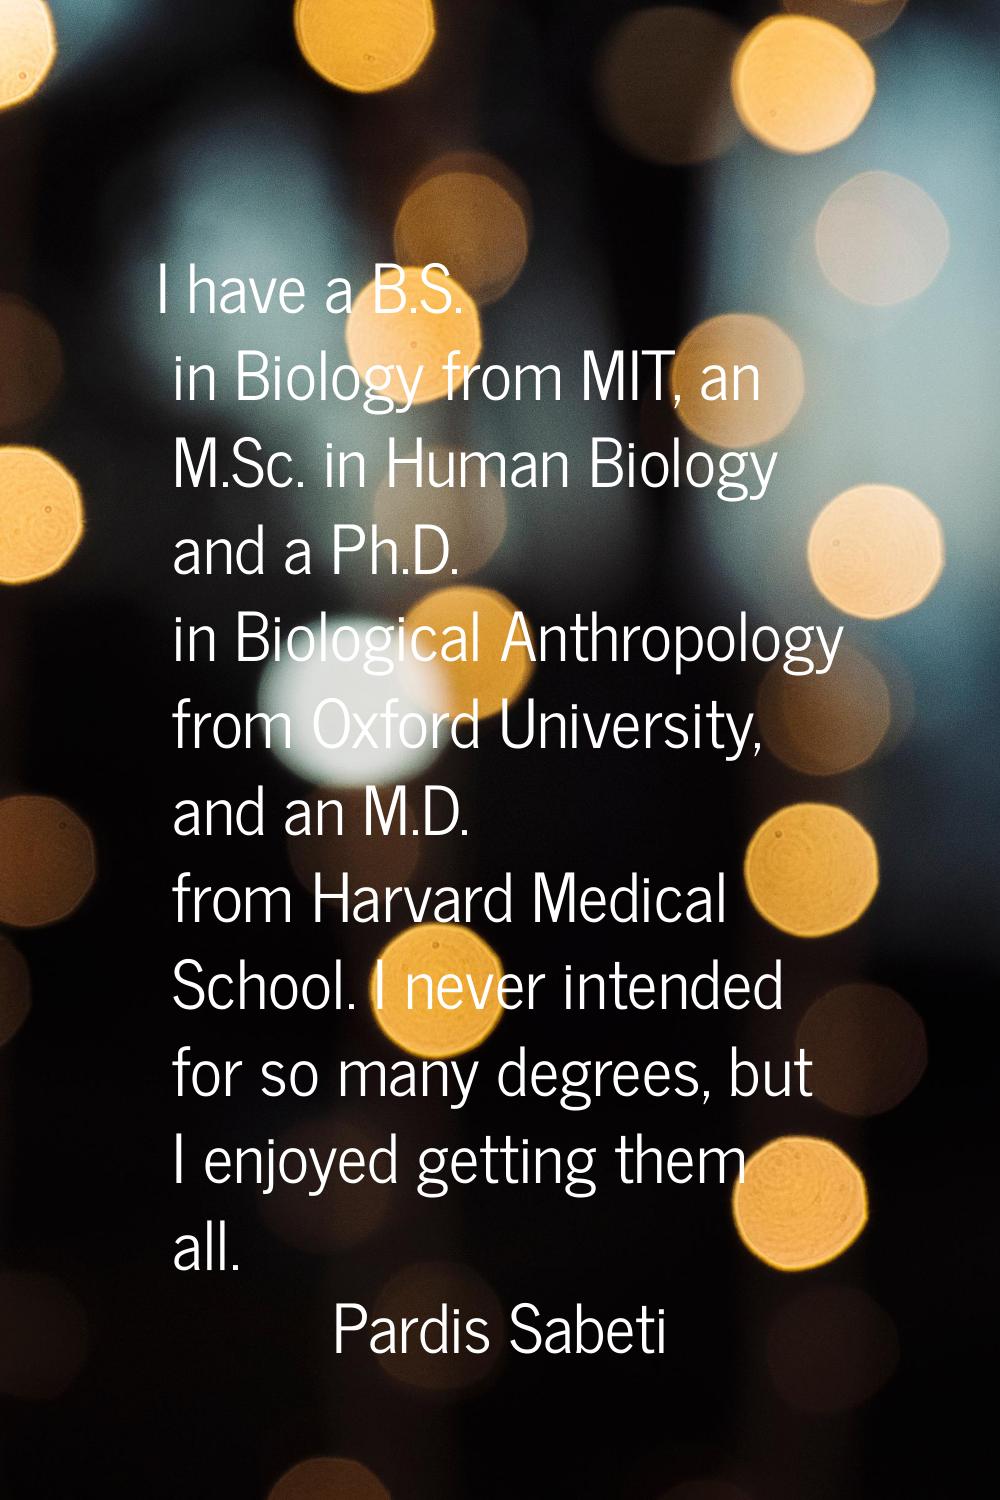 I have a B.S. in Biology from MIT, an M.Sc. in Human Biology and a Ph.D. in Biological Anthropology